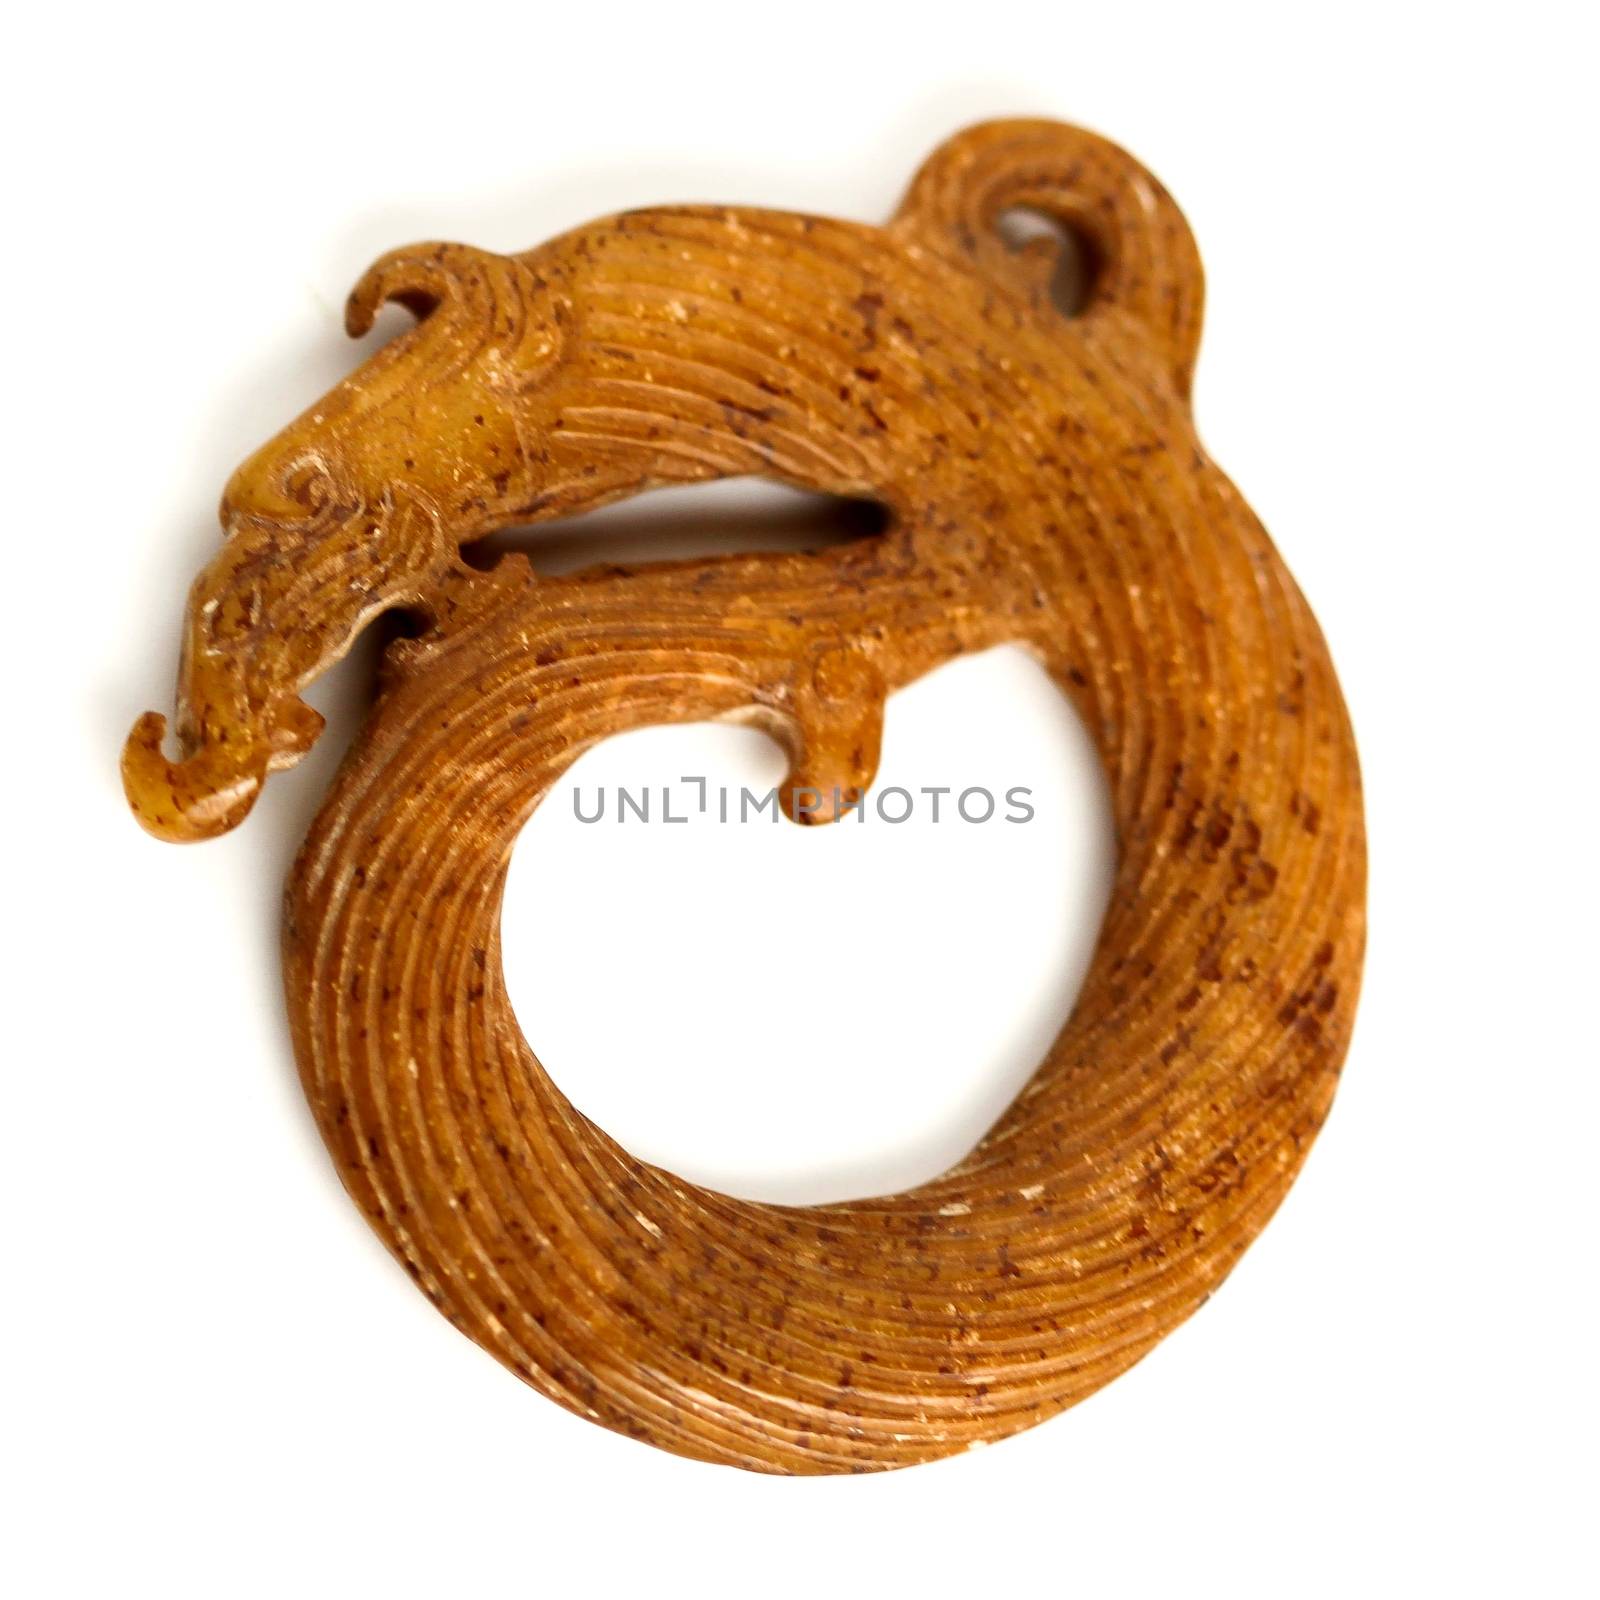 A Chinese brown jade ring on white background.